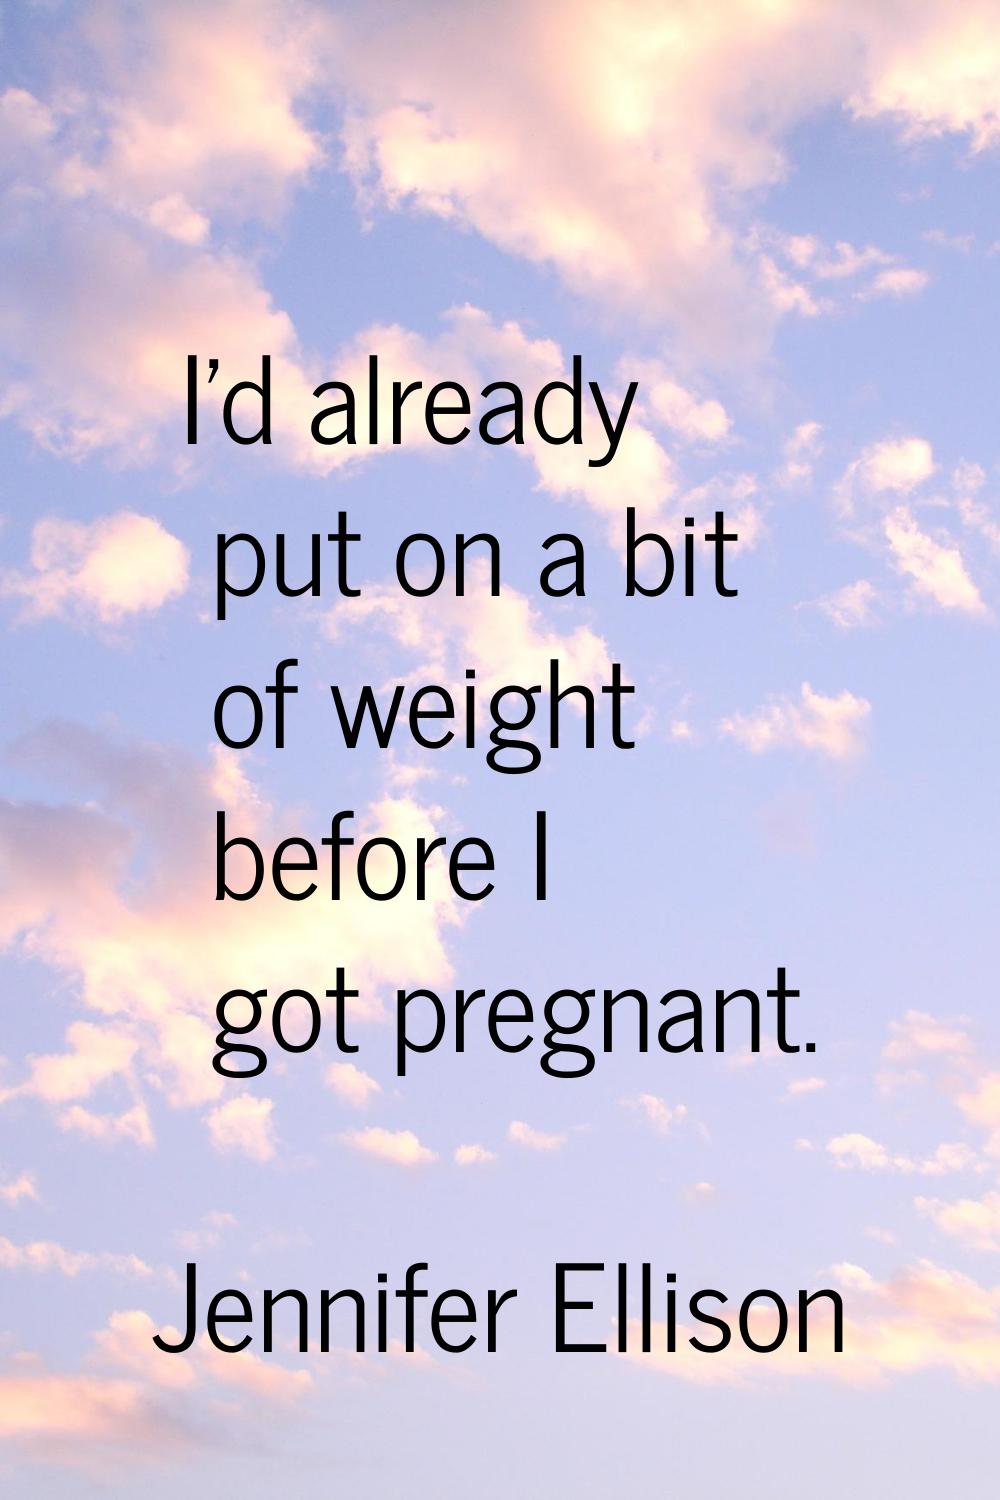 I'd already put on a bit of weight before I got pregnant.